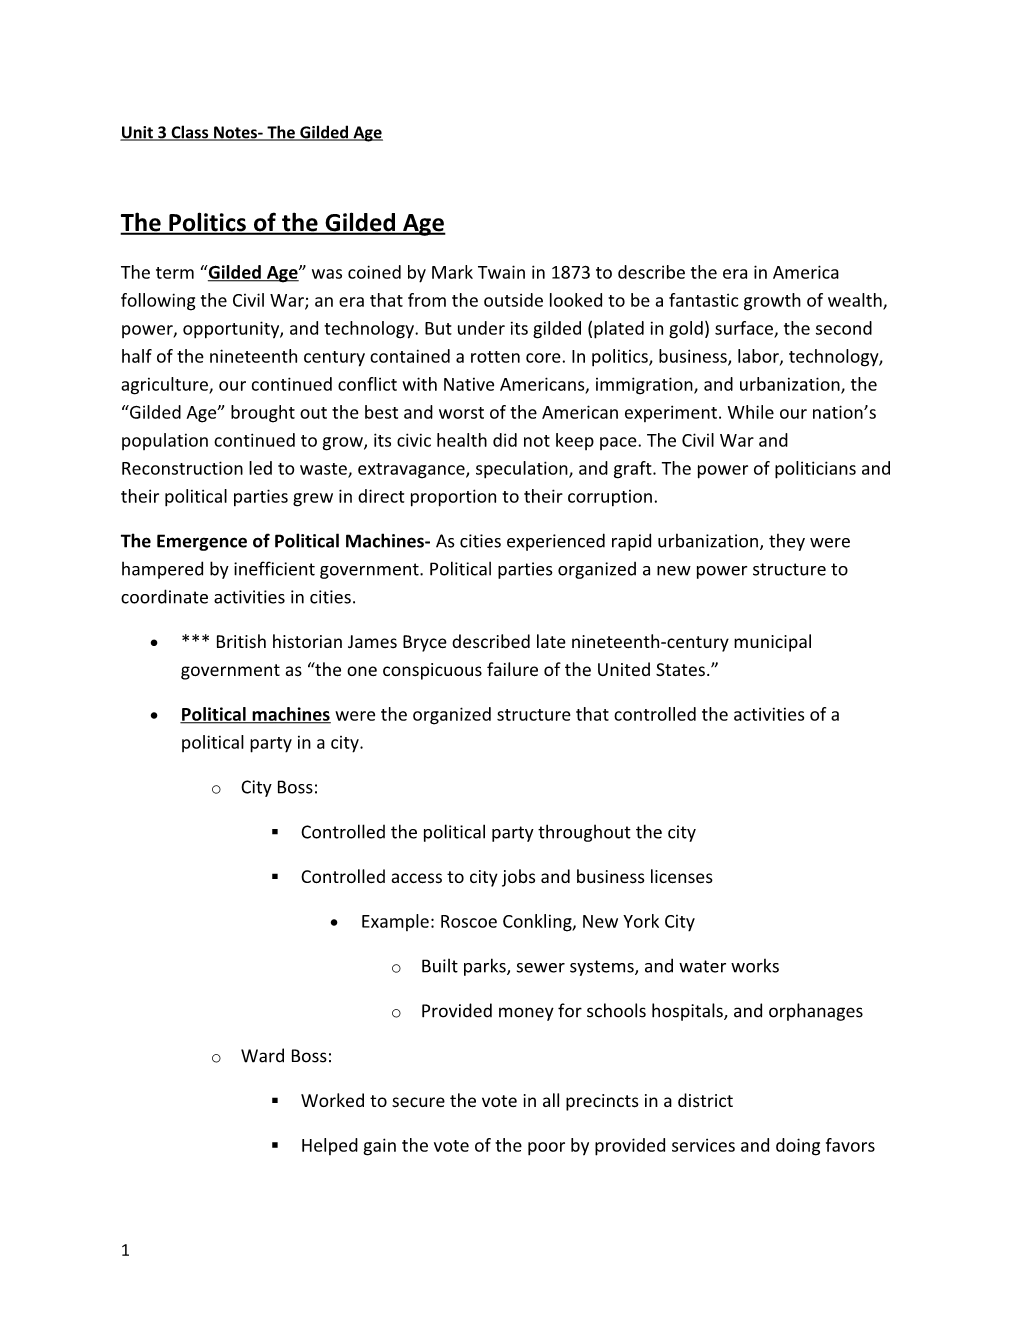 Unit 3 Class Notes- the Gilded Age